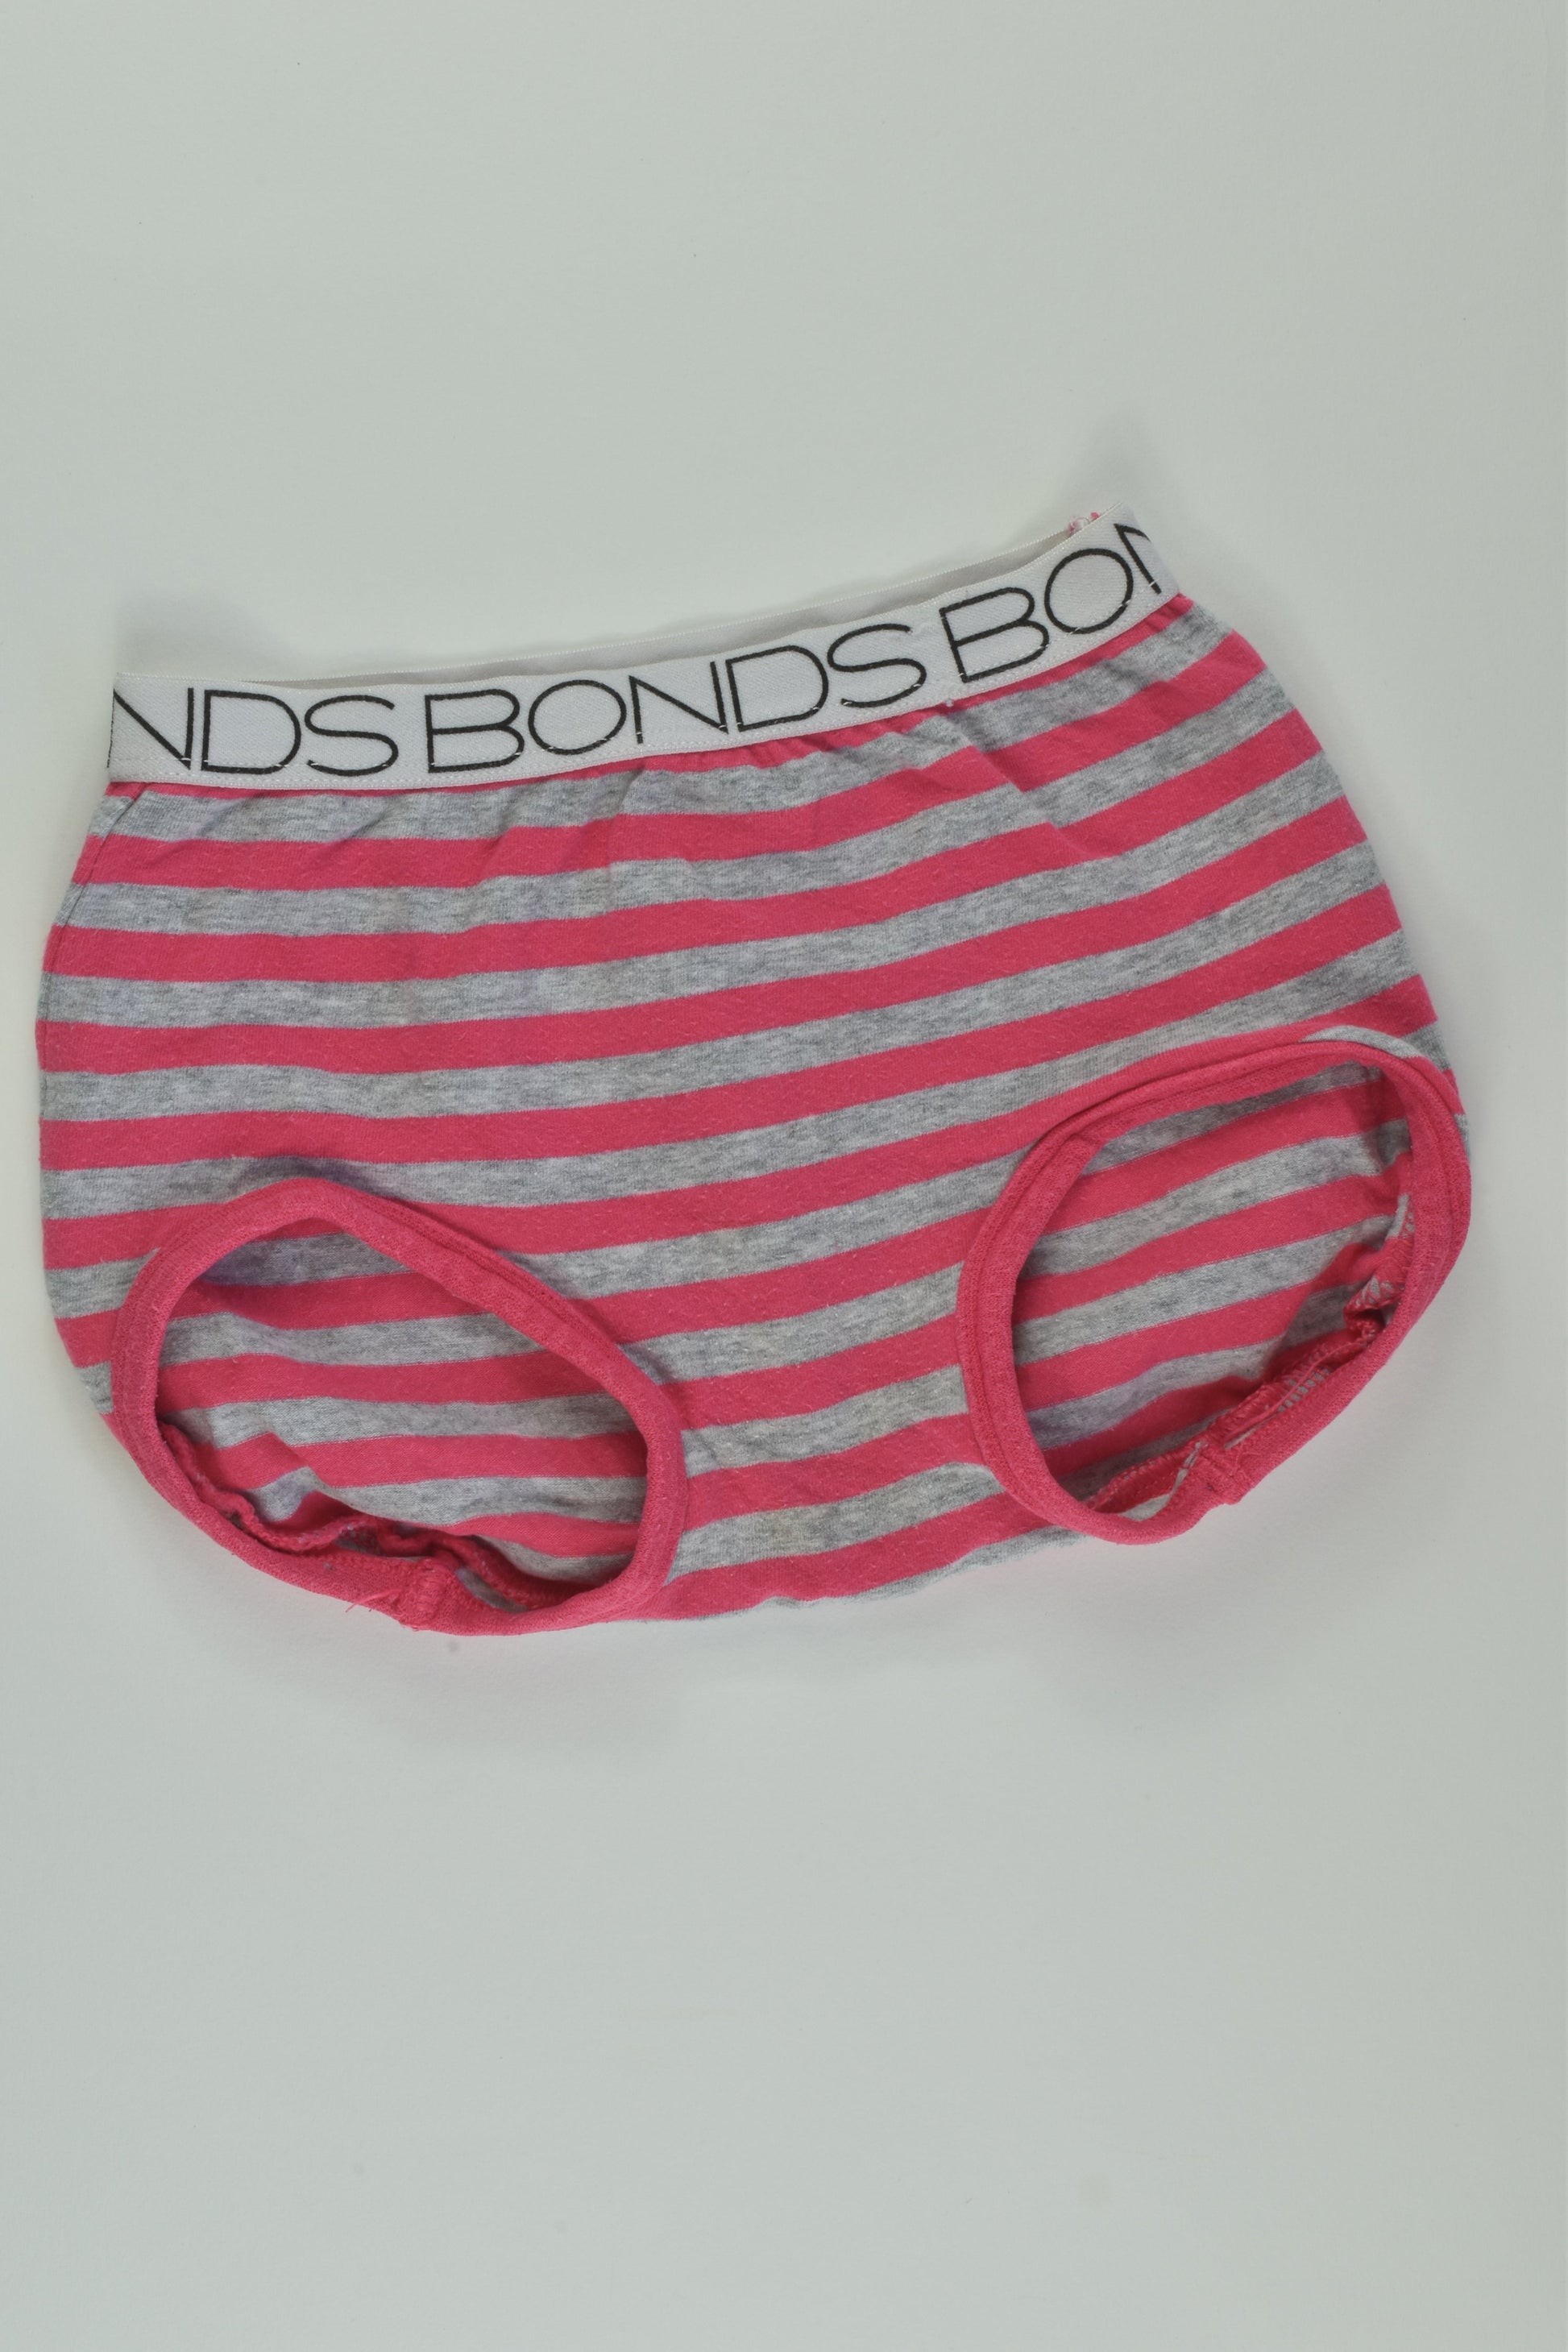 Bonds Size 1 Striped Bloomers